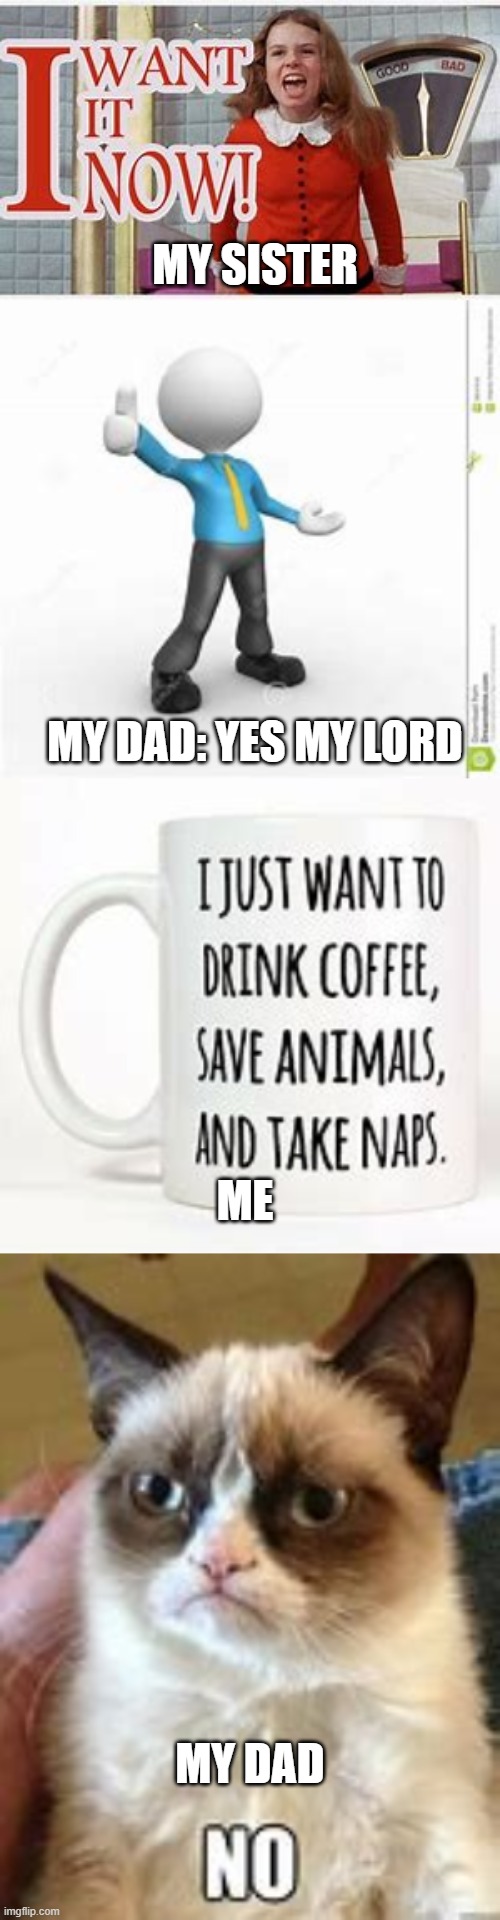 MY SISTER; MY DAD: YES MY LORD; ME; MY DAD | image tagged in life | made w/ Imgflip meme maker